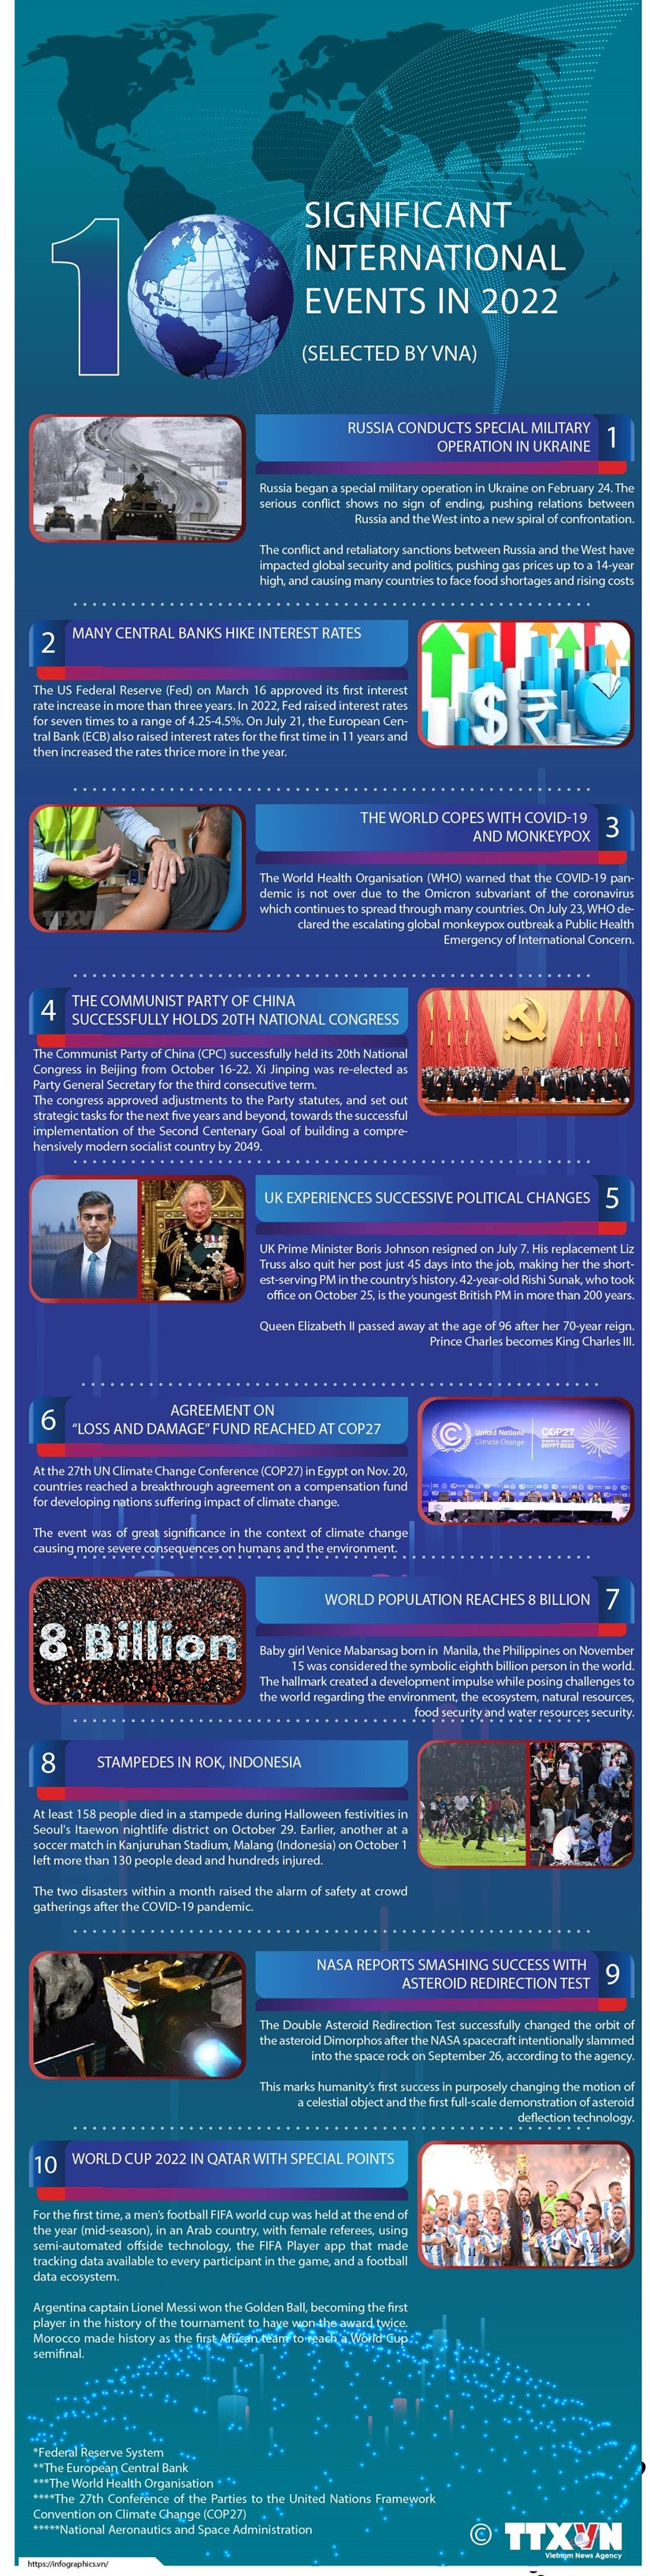 Top 10 international events in 2022 selected by VNA hinh anh 1